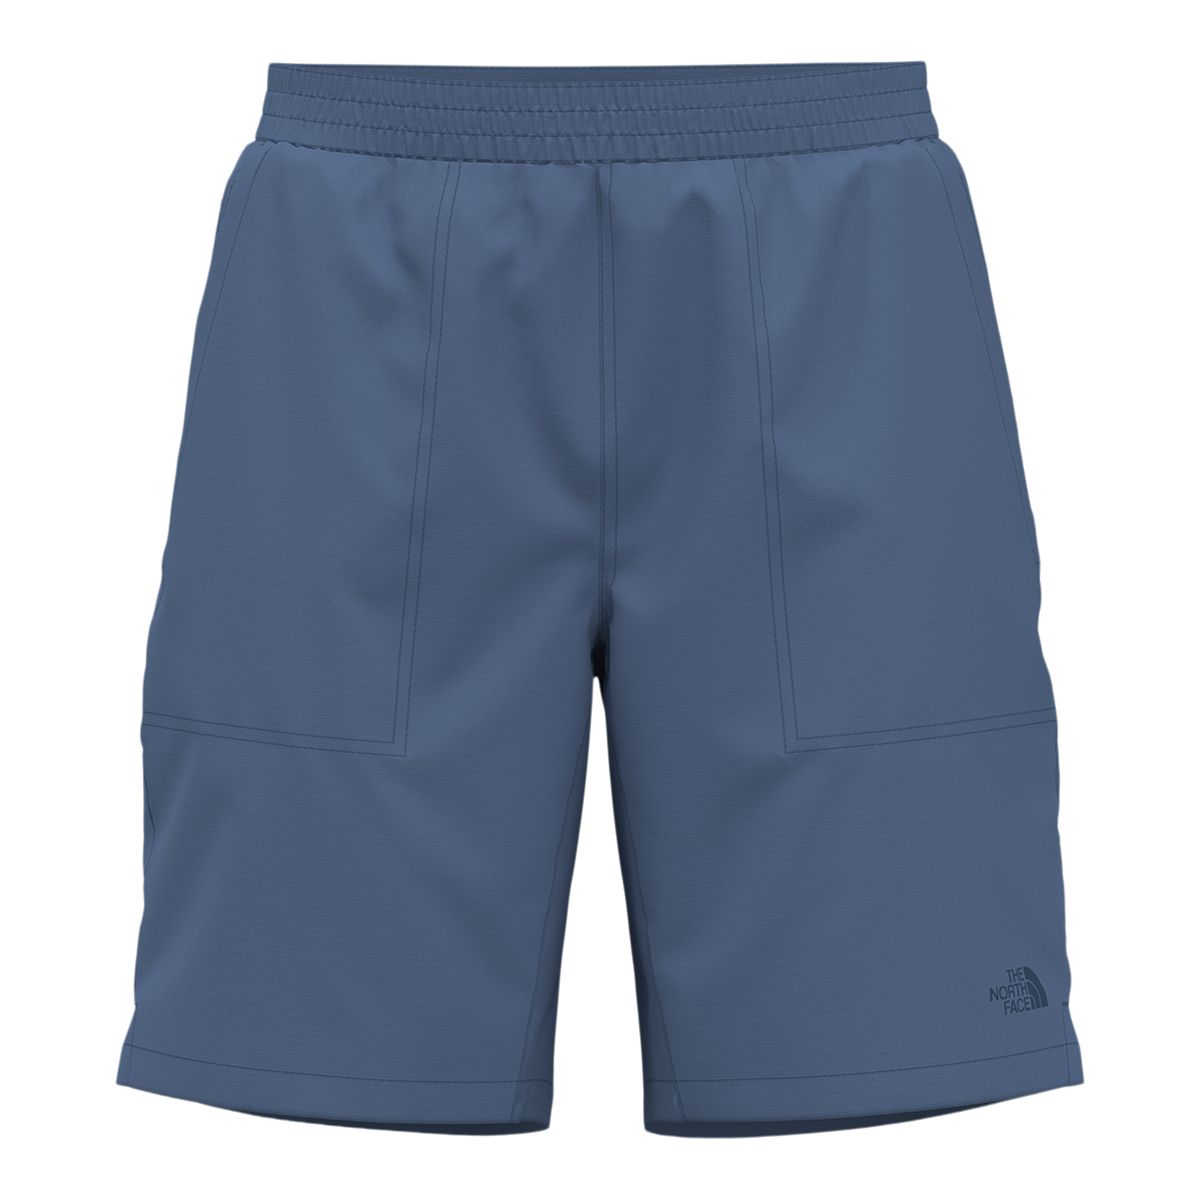  The North Face Men's Dry Short Underwear, Reduces